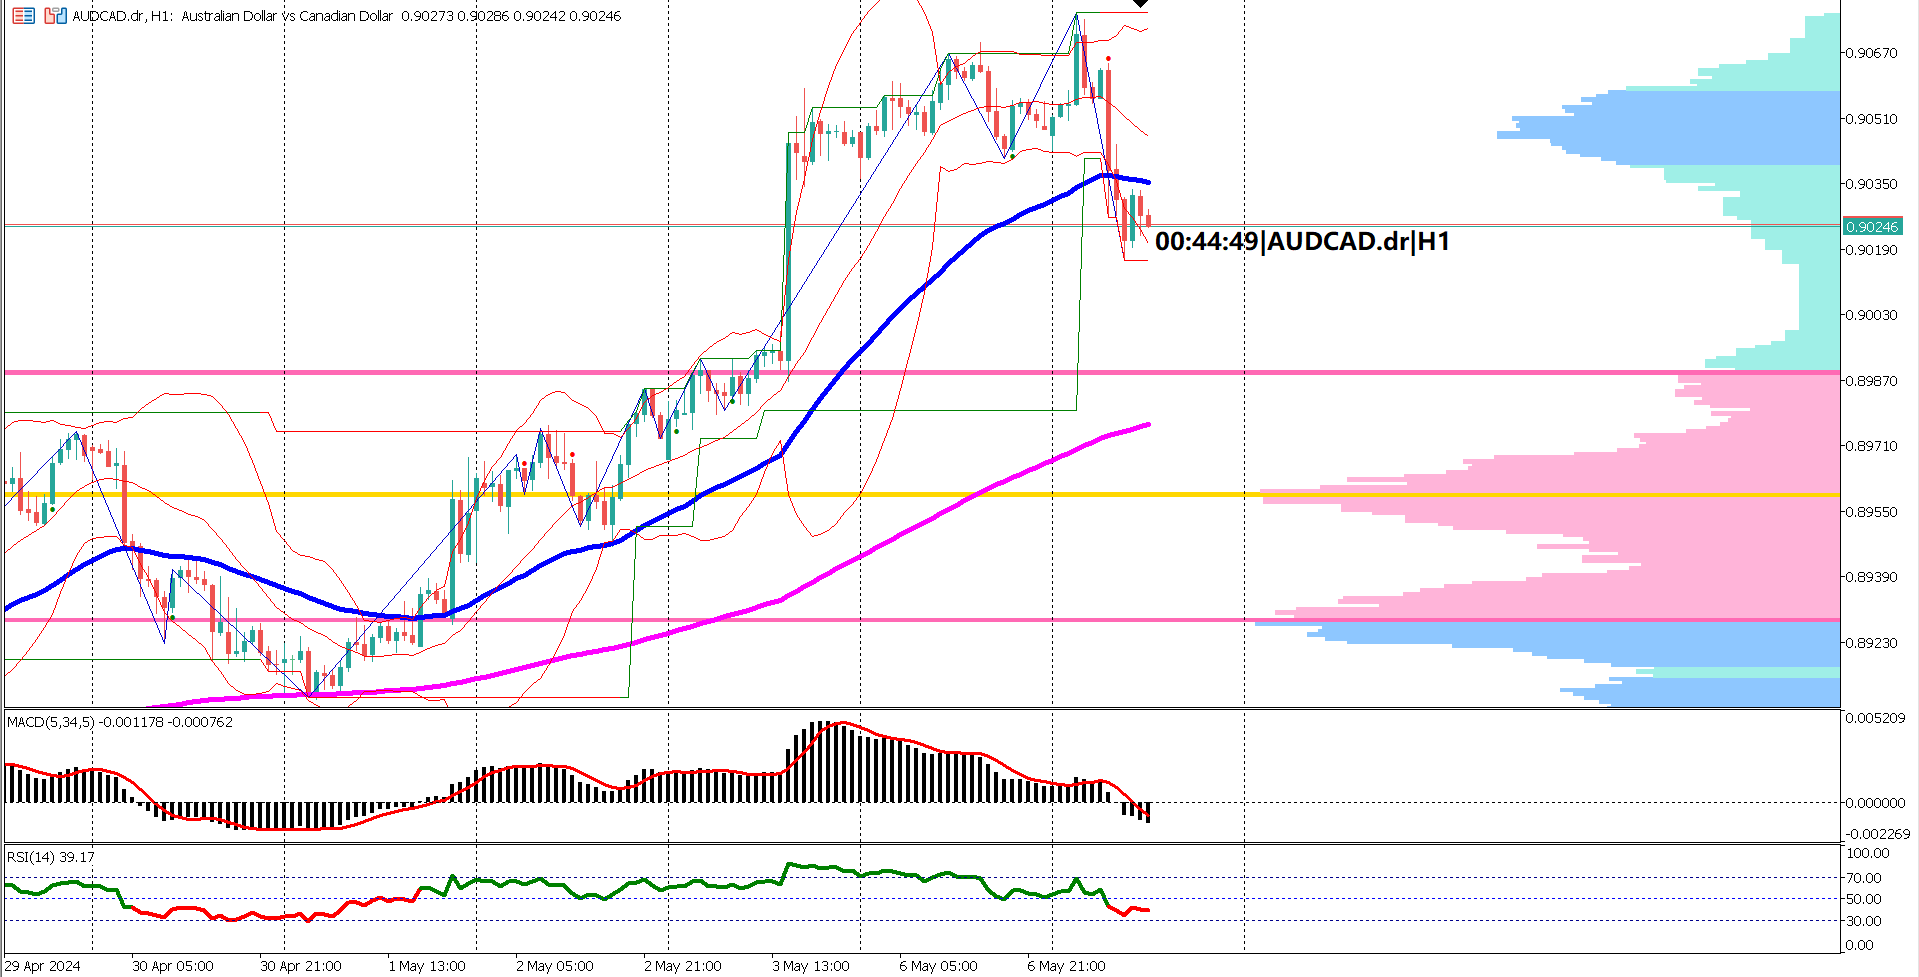 AUDCAD Sees Volatility Amidst Economic News and Technical Signals